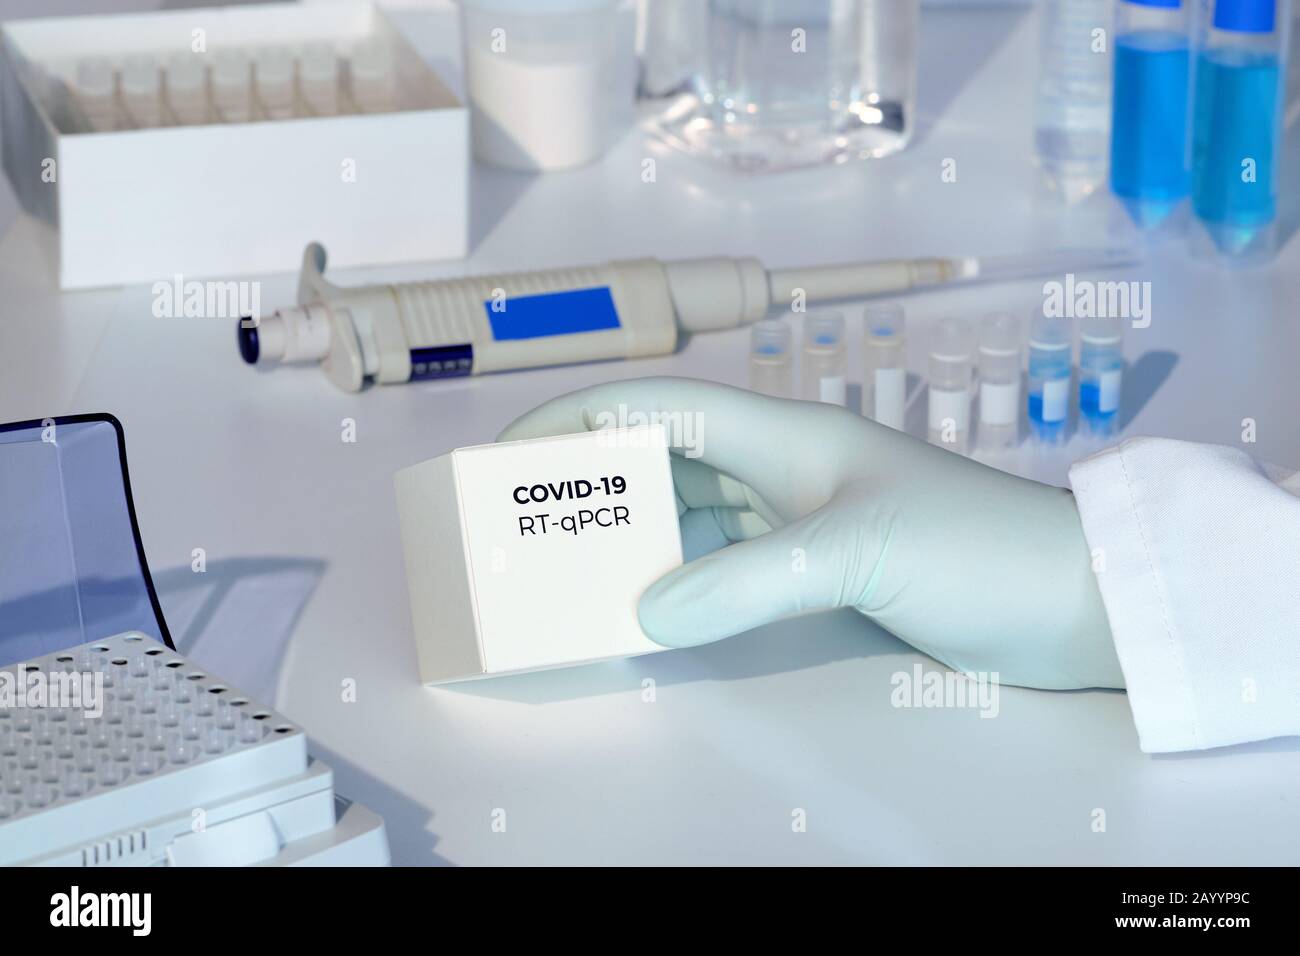 Quick novel COVID-19 coronavirus test kit. 2019 nCoV pcr diagnostics kit. Hand in glove with the box. RT-PCR kit to detect covid19 virus in clinical s Stock Photo